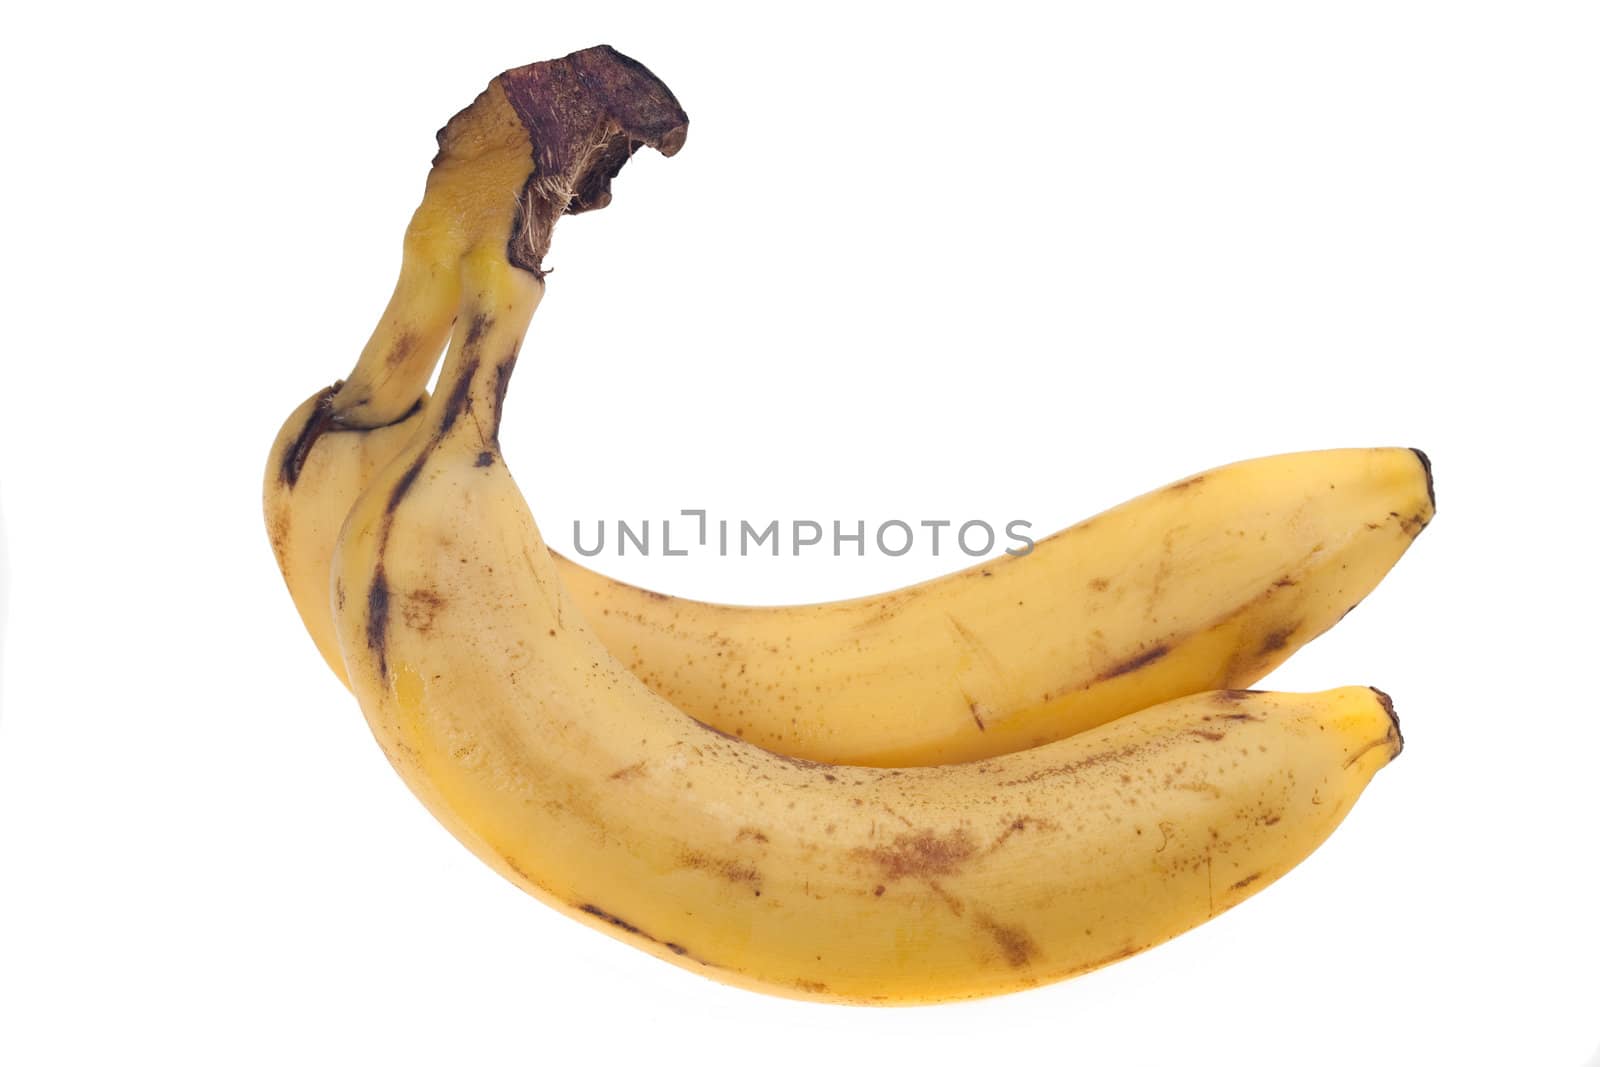 two bananas isolated on white background